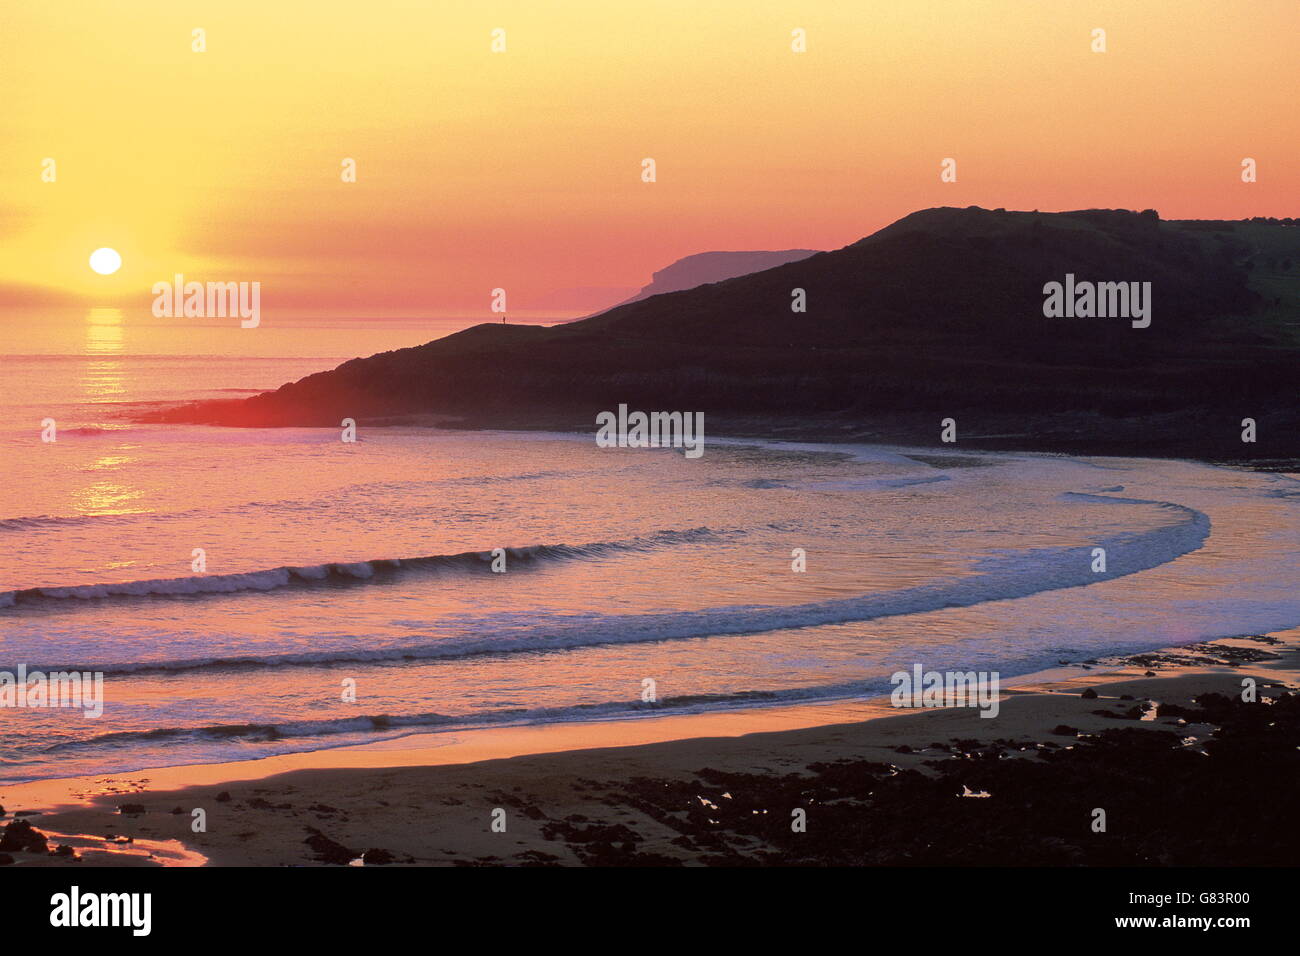 Classic orange sunset over beach .Waves curve into the bay below, sheltered by headlands. Stock Photo